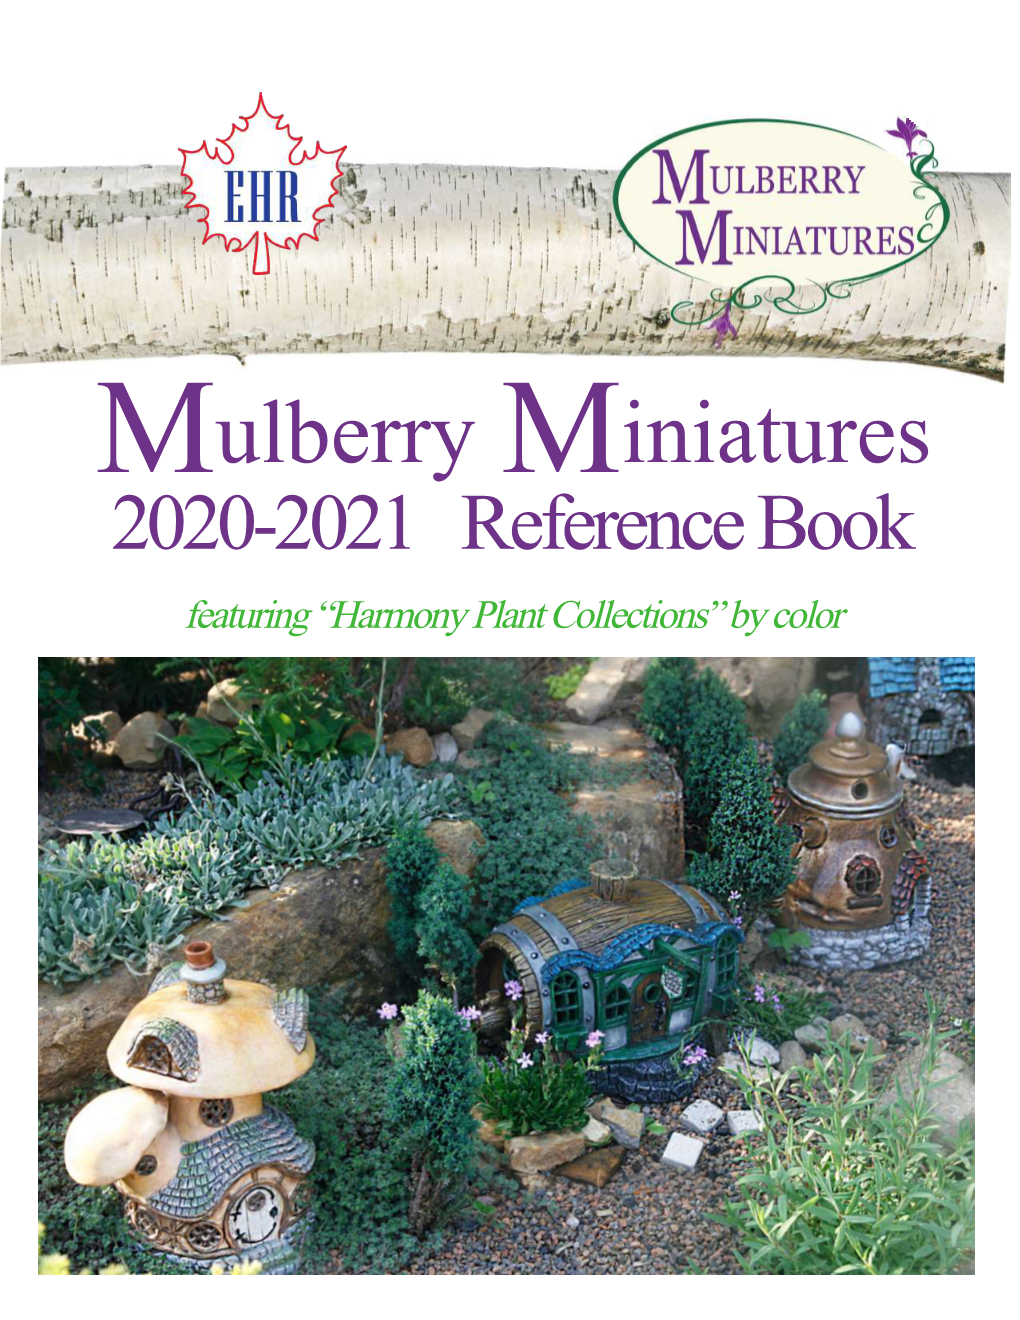 Mulberry Miniatures 2020-2021 Reference Book Featuring “Harmony Plant Collections” by Color Miniature Hardy Shade Perennials